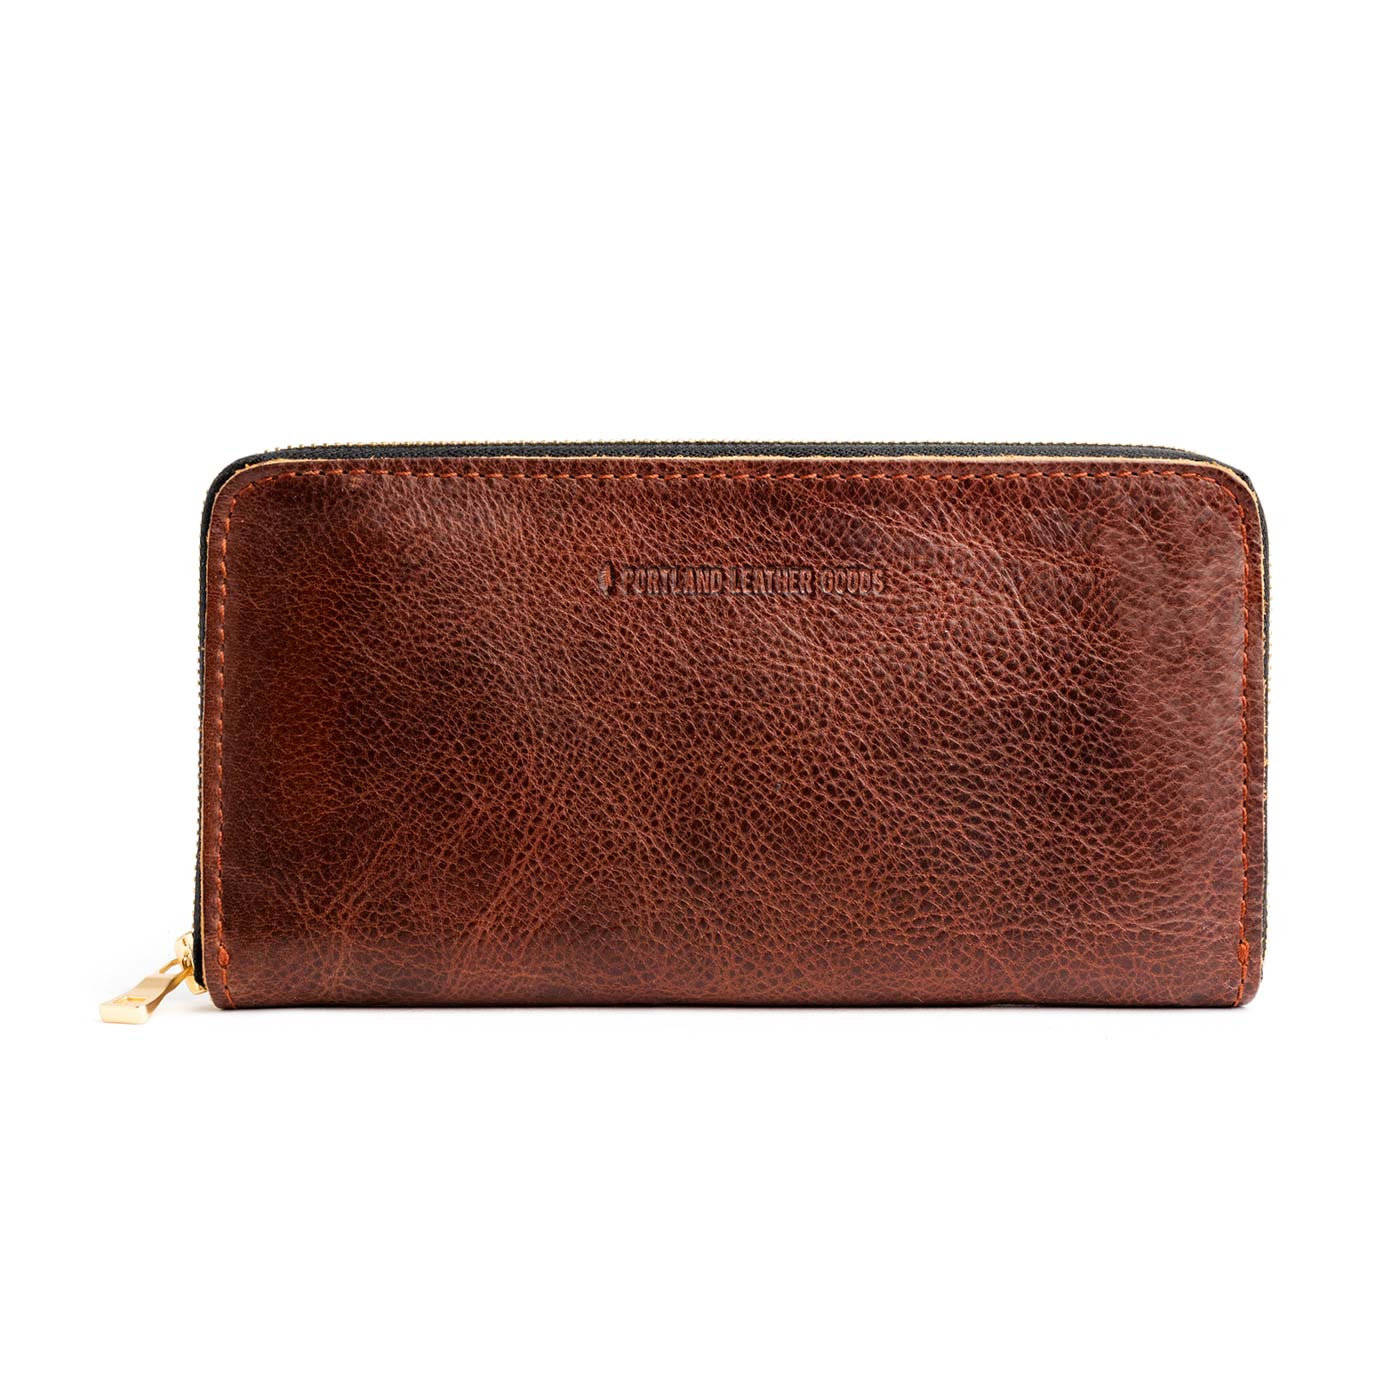 Womens Wallet - Honey Brown Leather